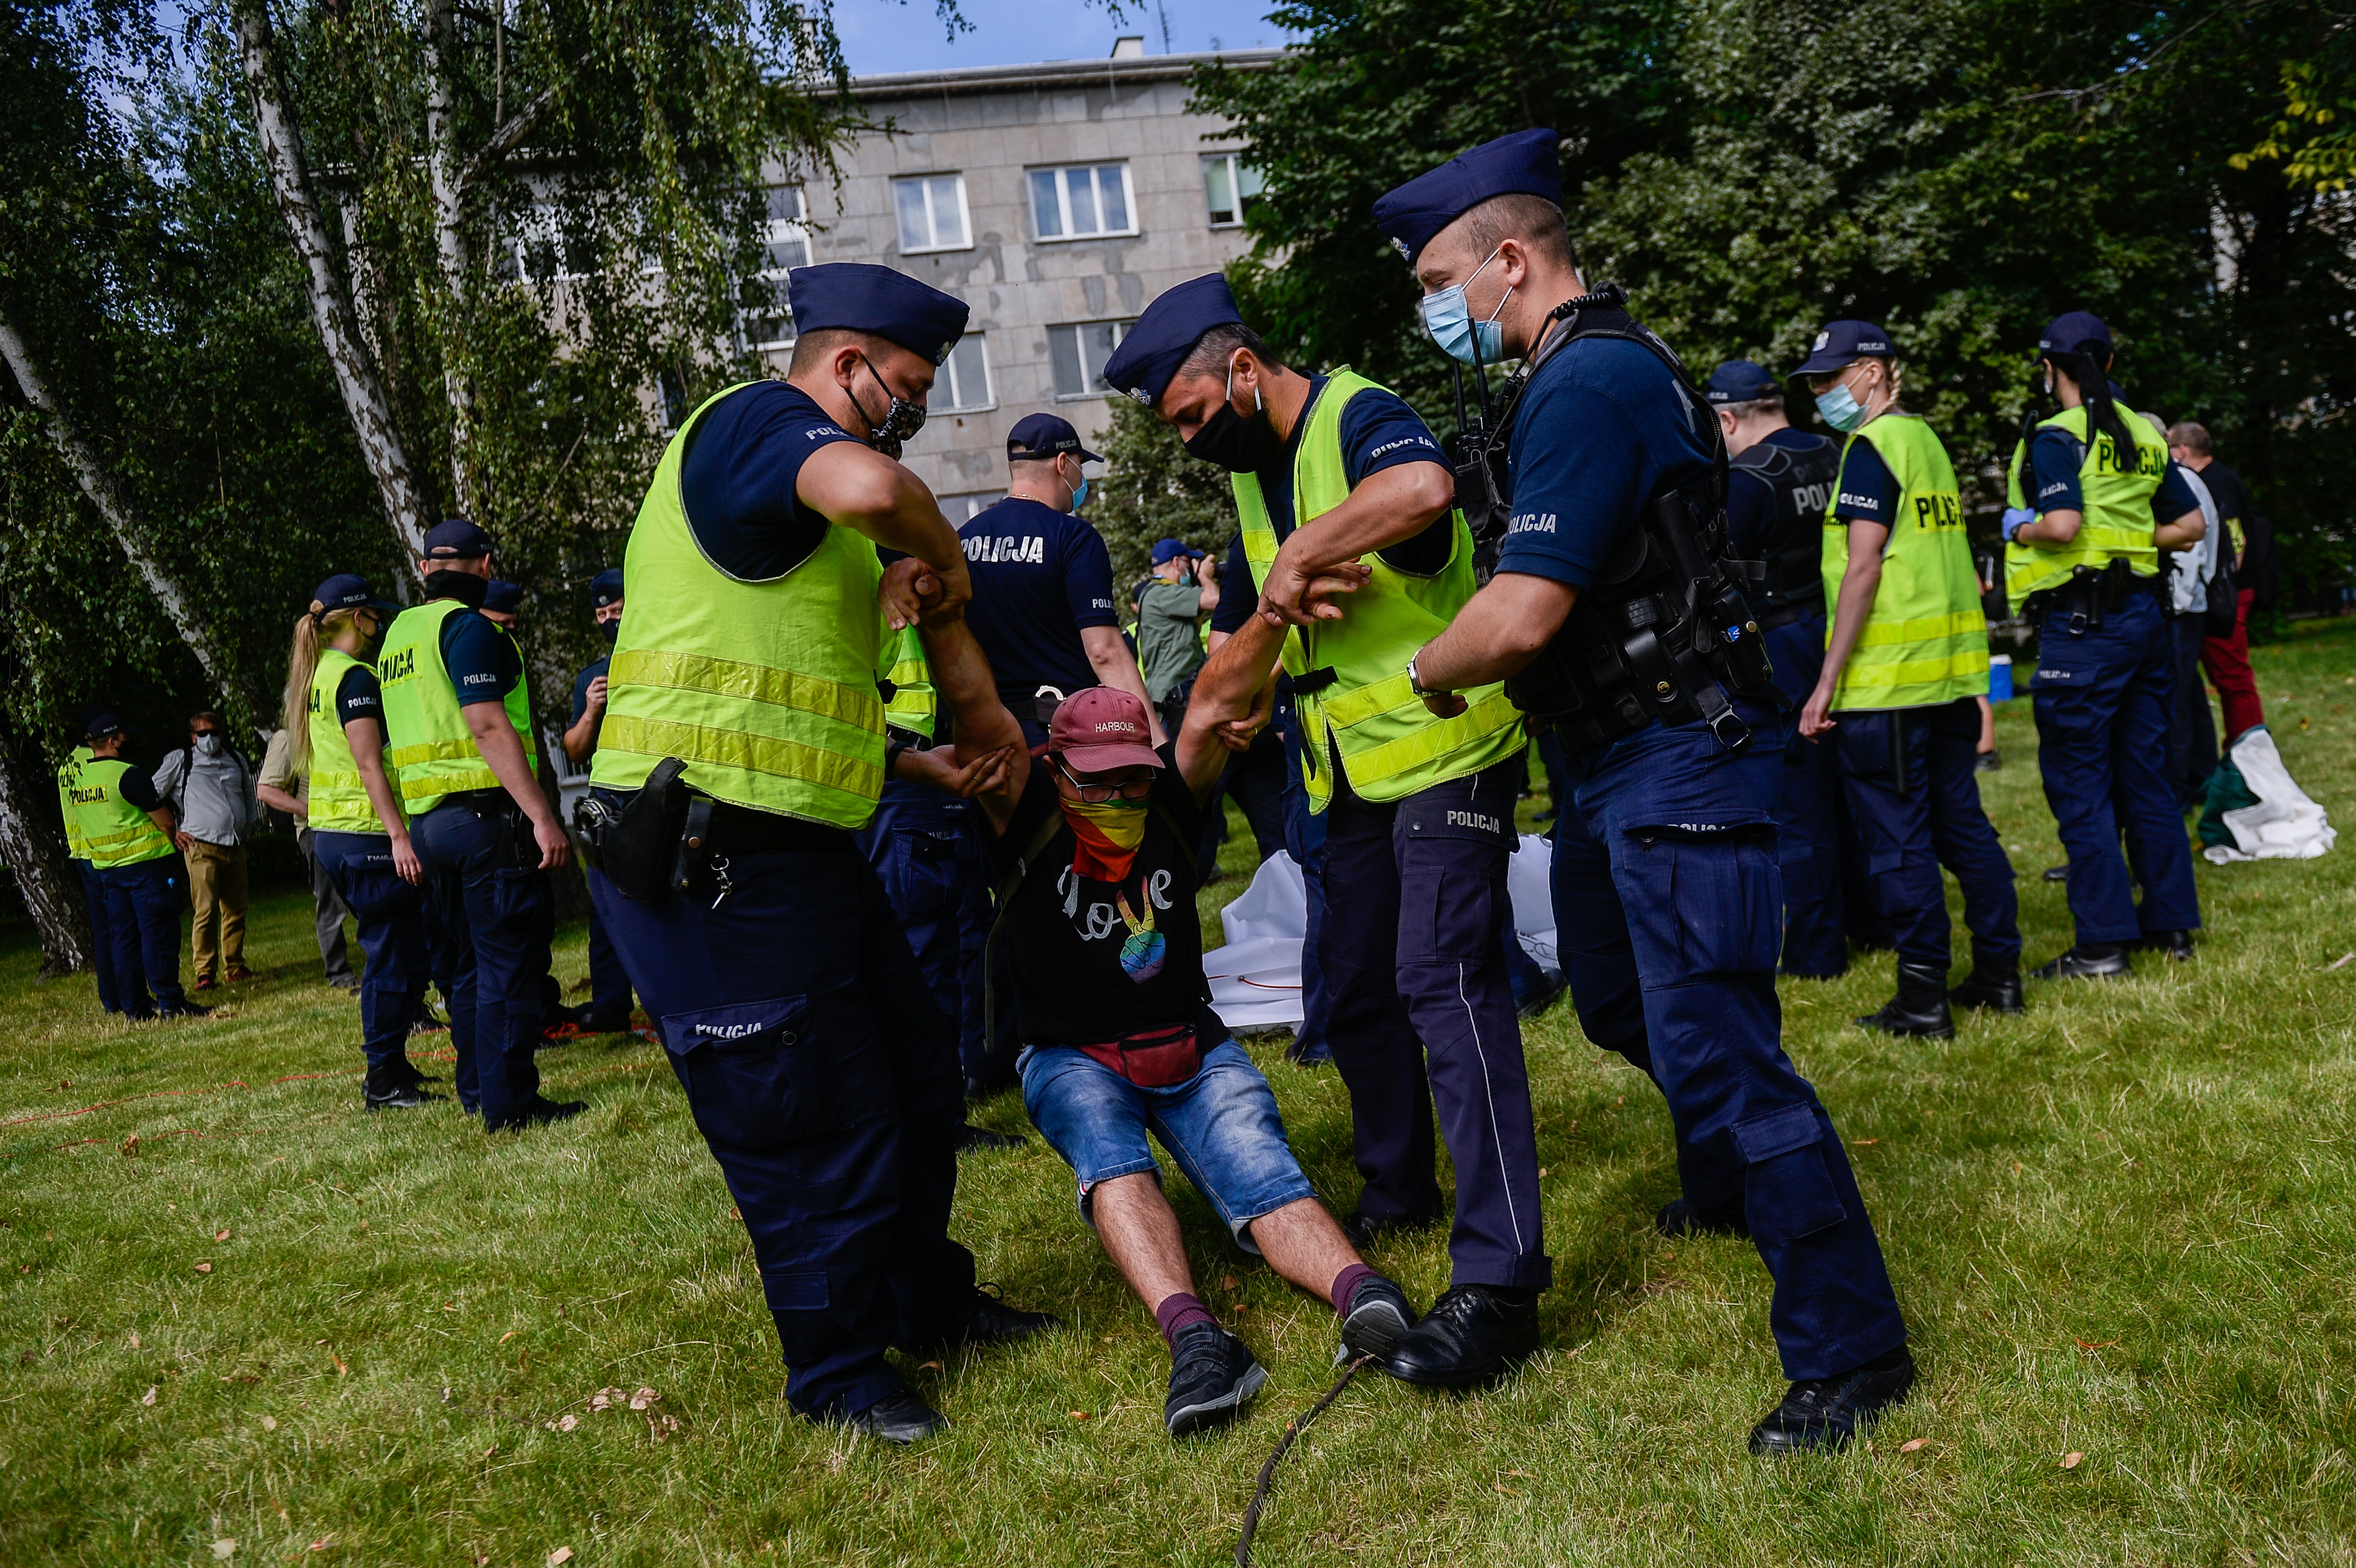 Police remove a protester wearing a shirt saying ‘love’ with rainbow colours as he protests against the president, Andrzej Duda. Growing hostility towards the LGBT+ community in Poland has driven a wave of demonstrations